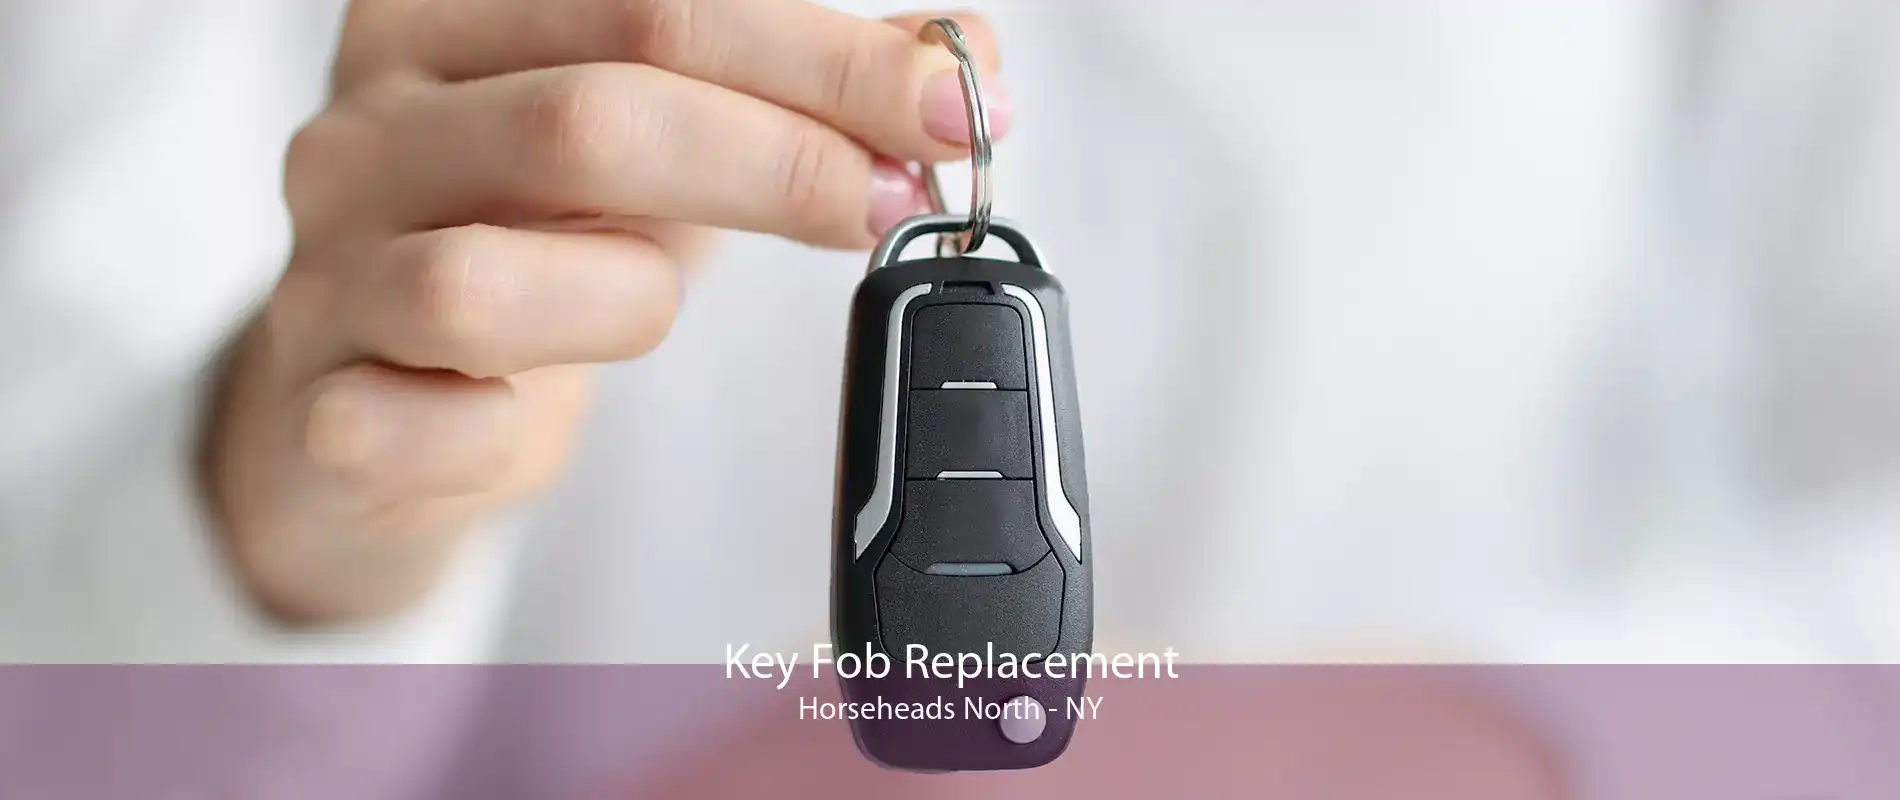 Key Fob Replacement Horseheads North - NY